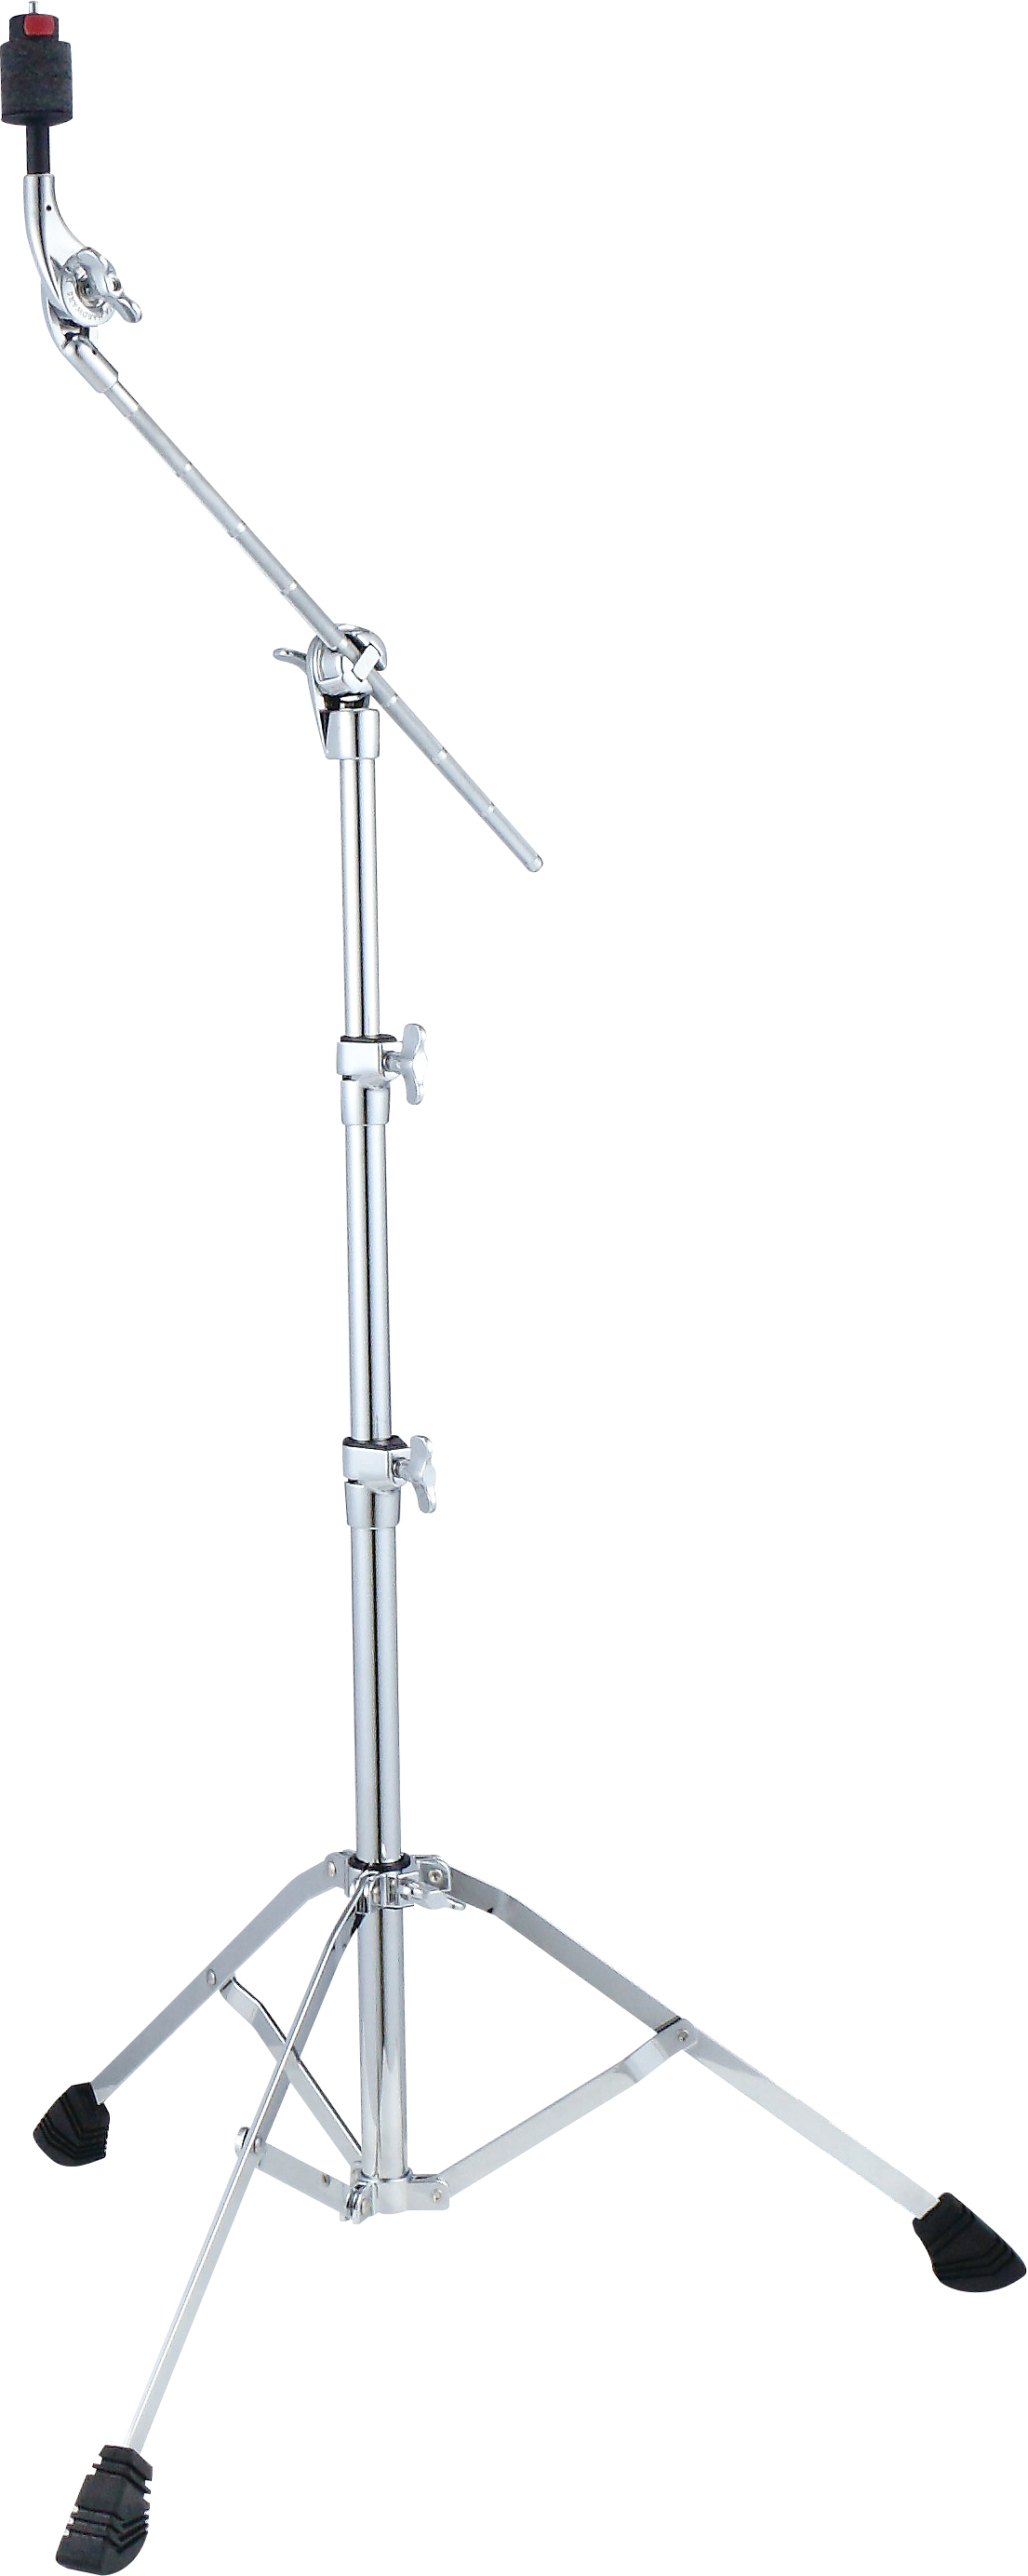 Tama Hc43bsn  Boom Cymbal Stand - Pied De Cymbale - Main picture